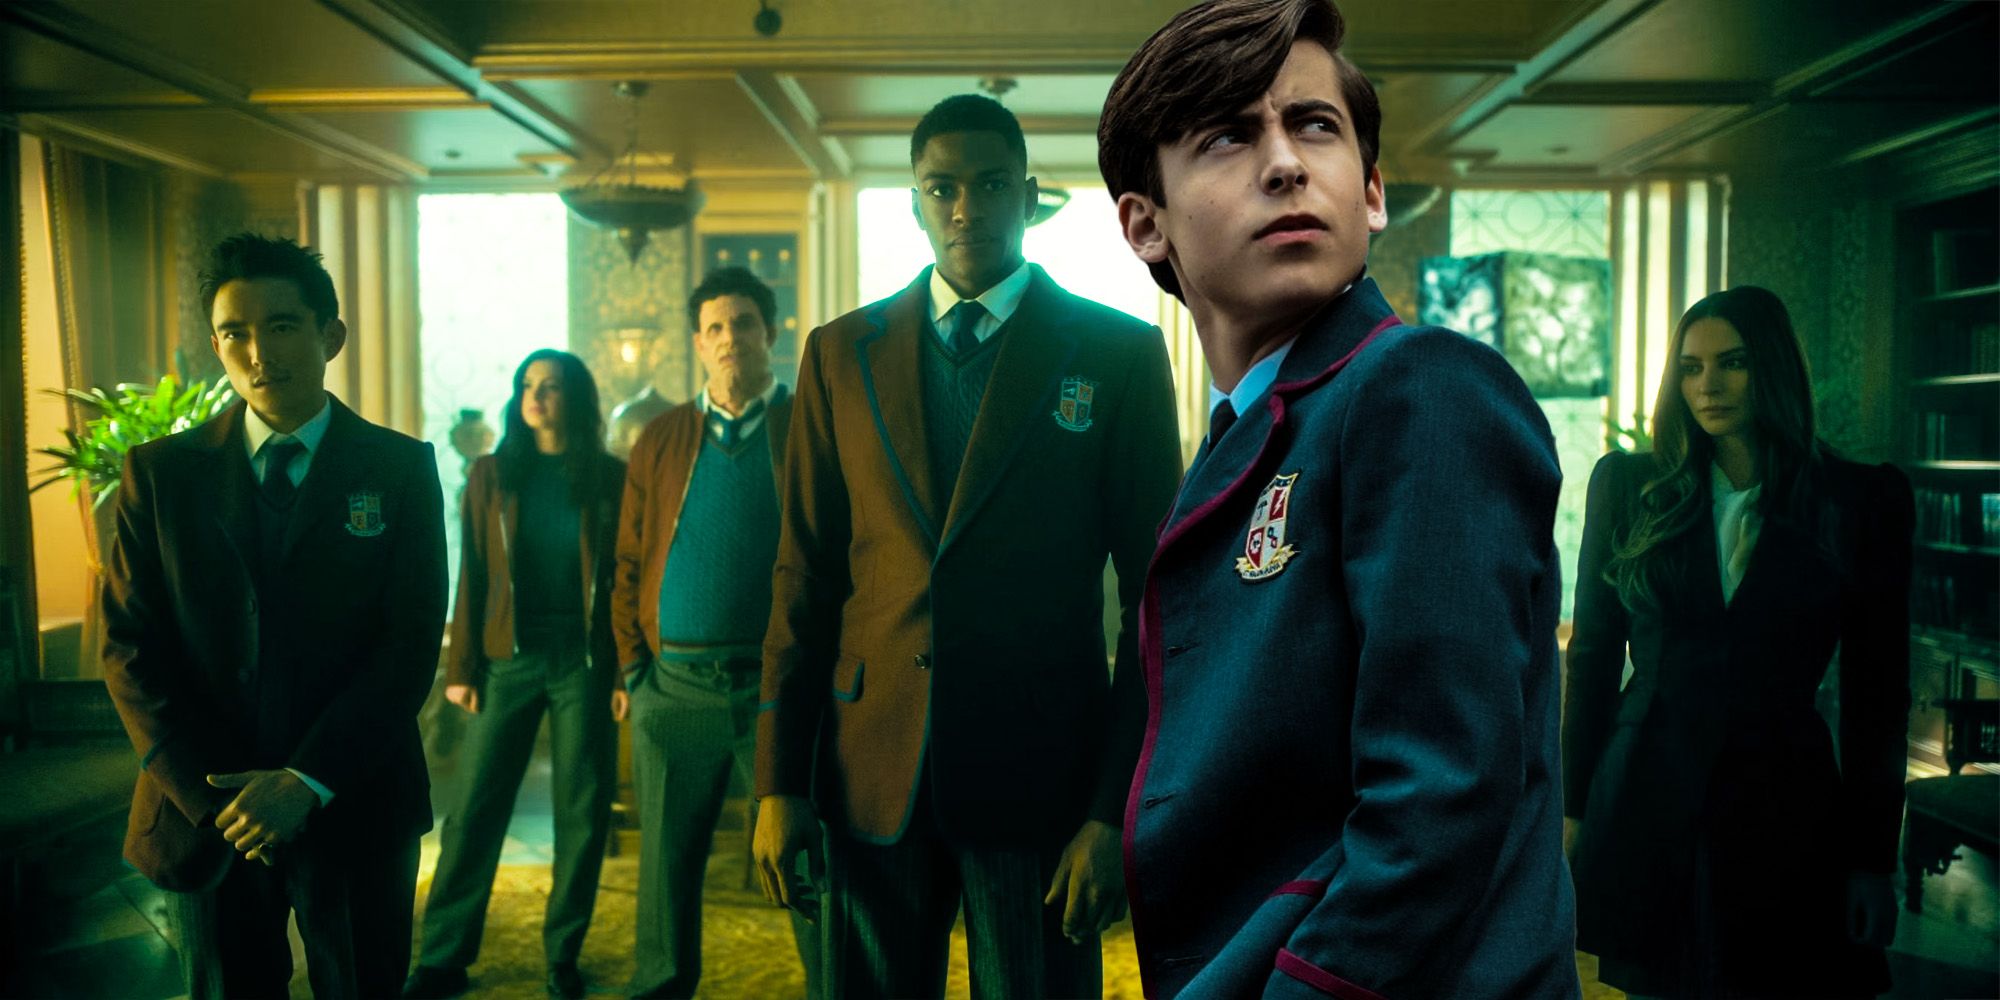 Umbrella academy season 3 cast and character guide